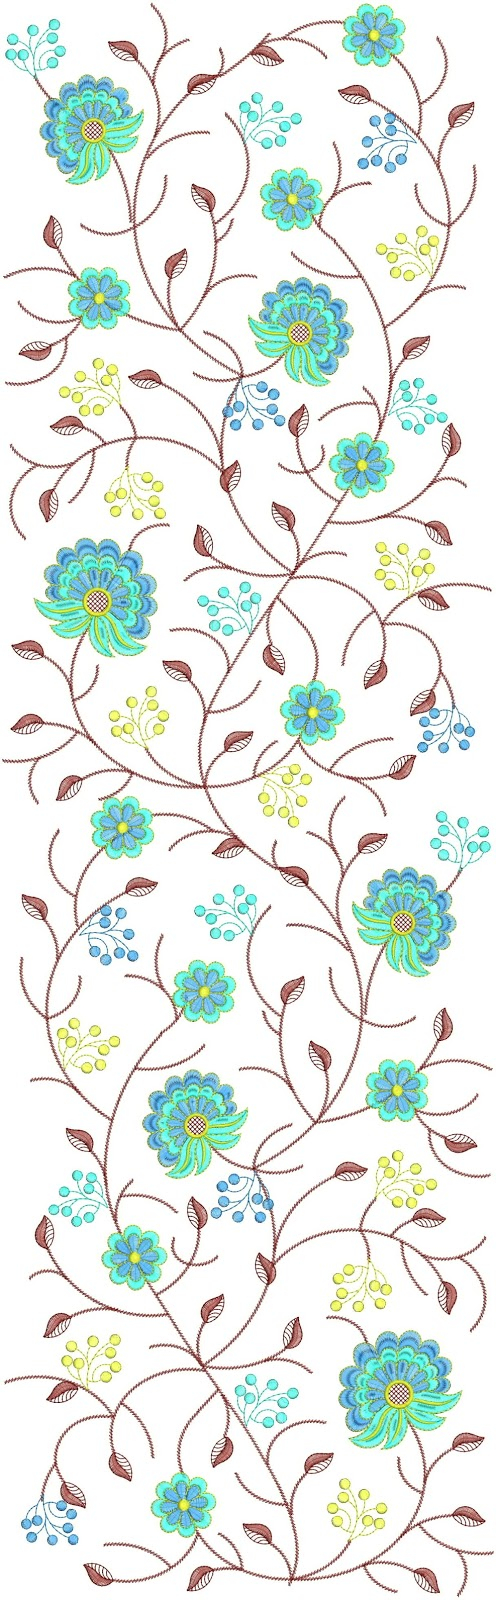 Western Embroidery Patterns Western Embroidery Patterns